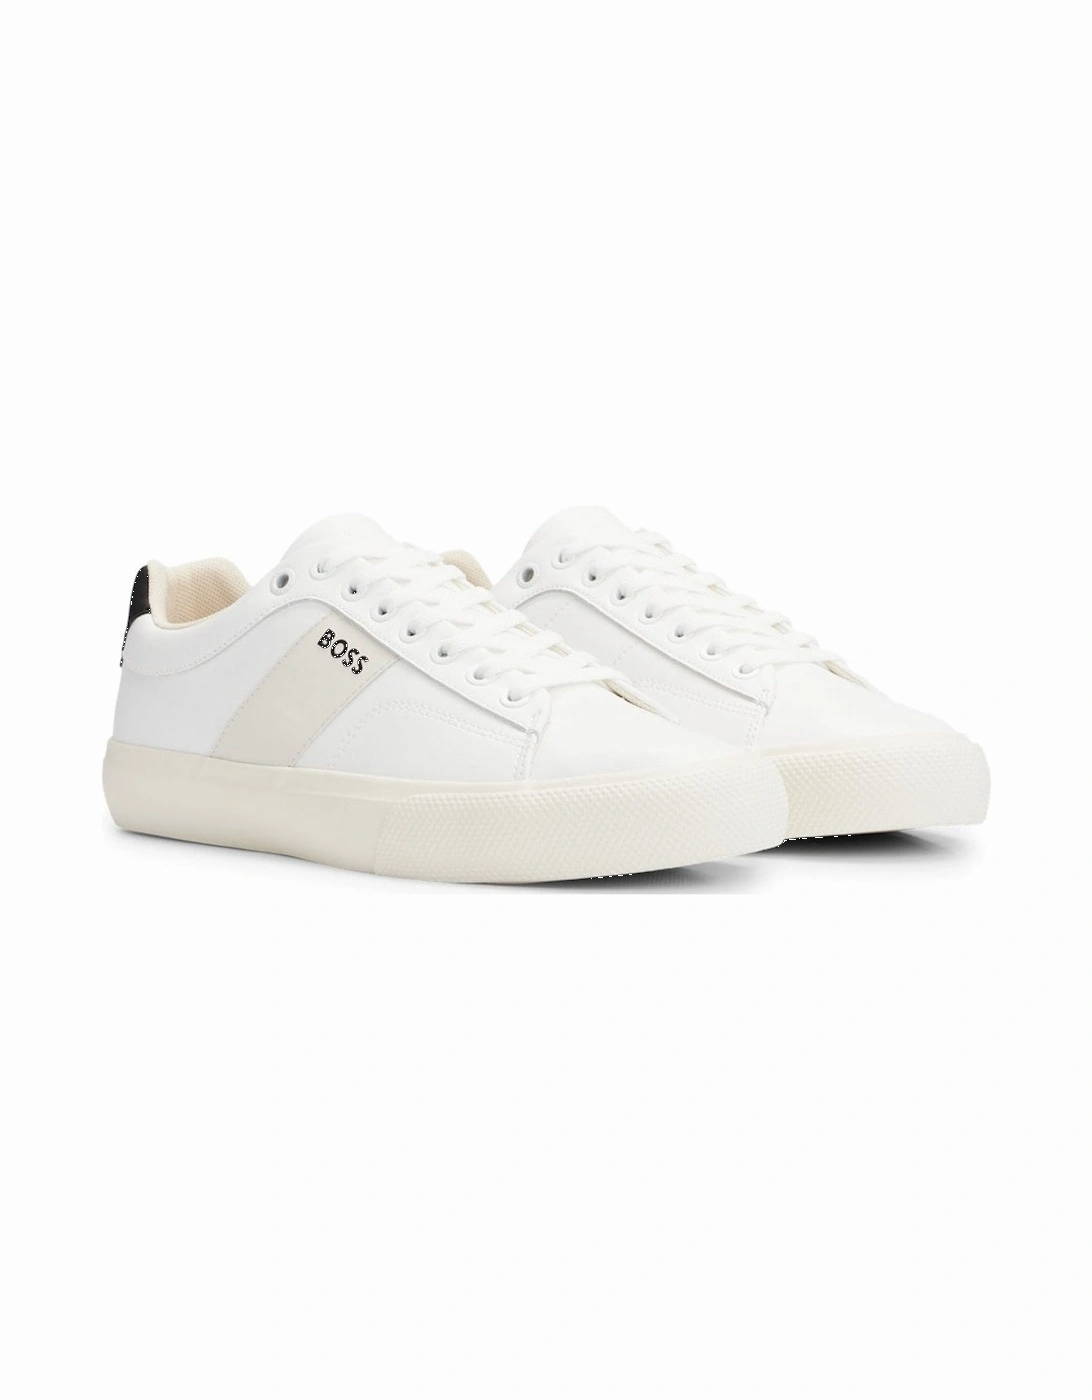 Hugo Boss Men's White Aiden Cupsole Trainers With Contrast Band